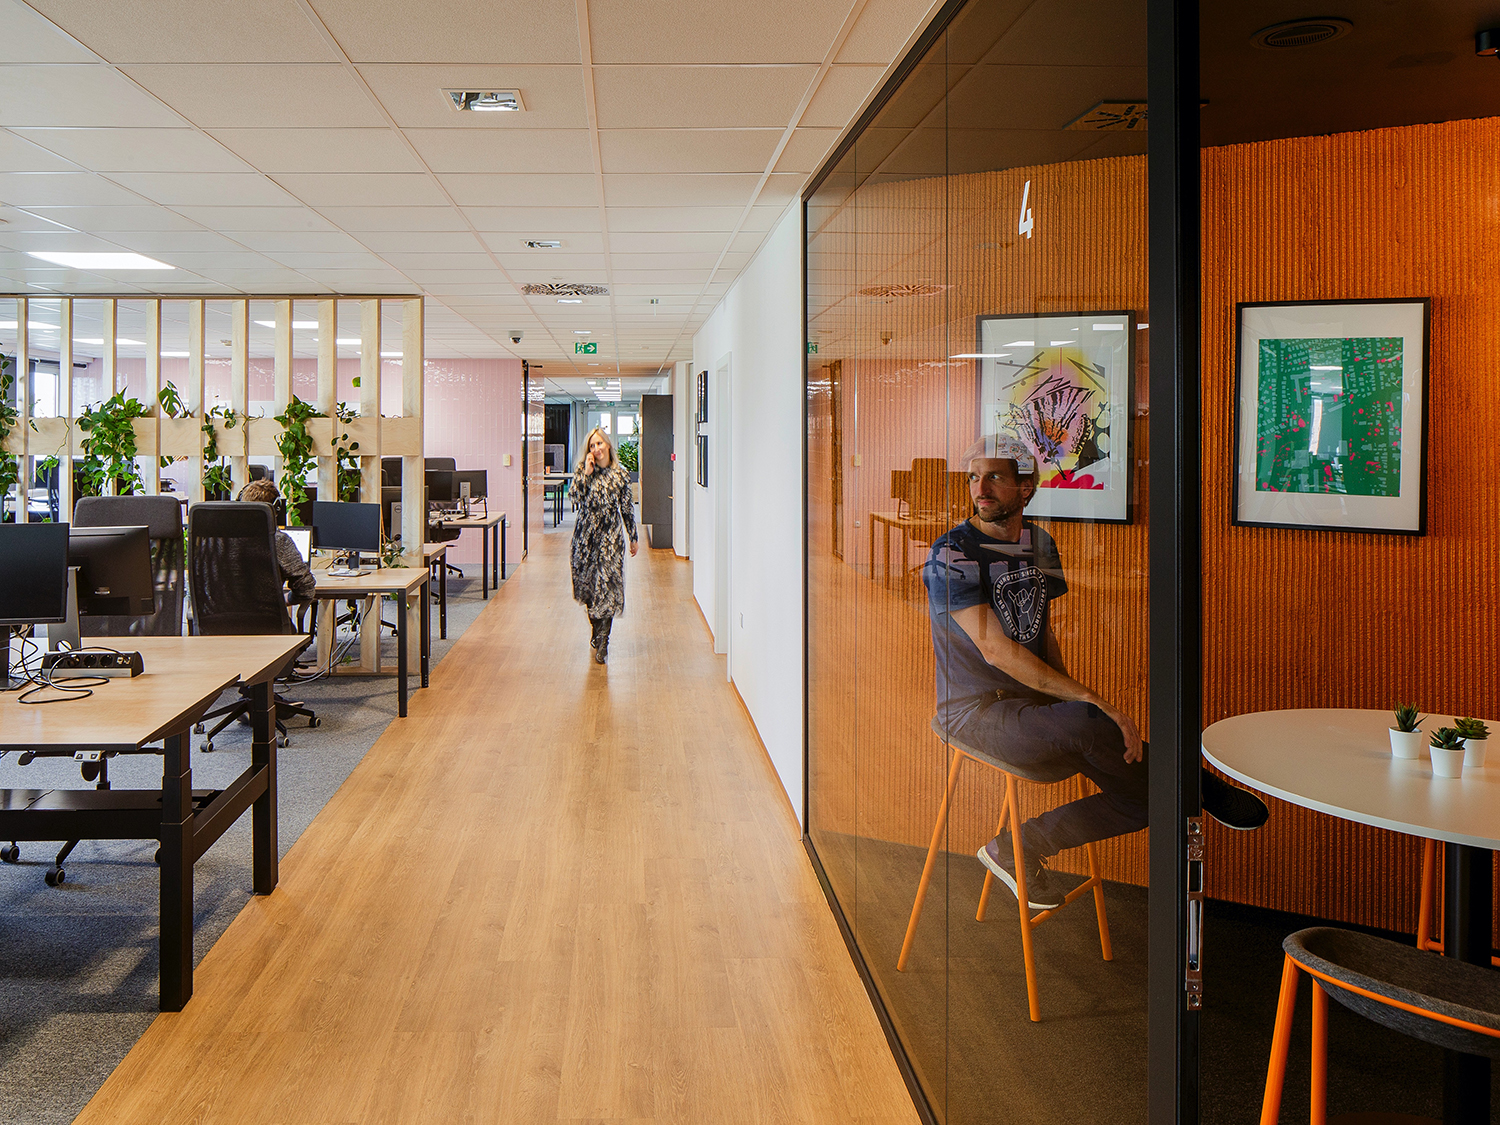 Open office space with wooden floors and an ajoining orange office behind a glass wall.